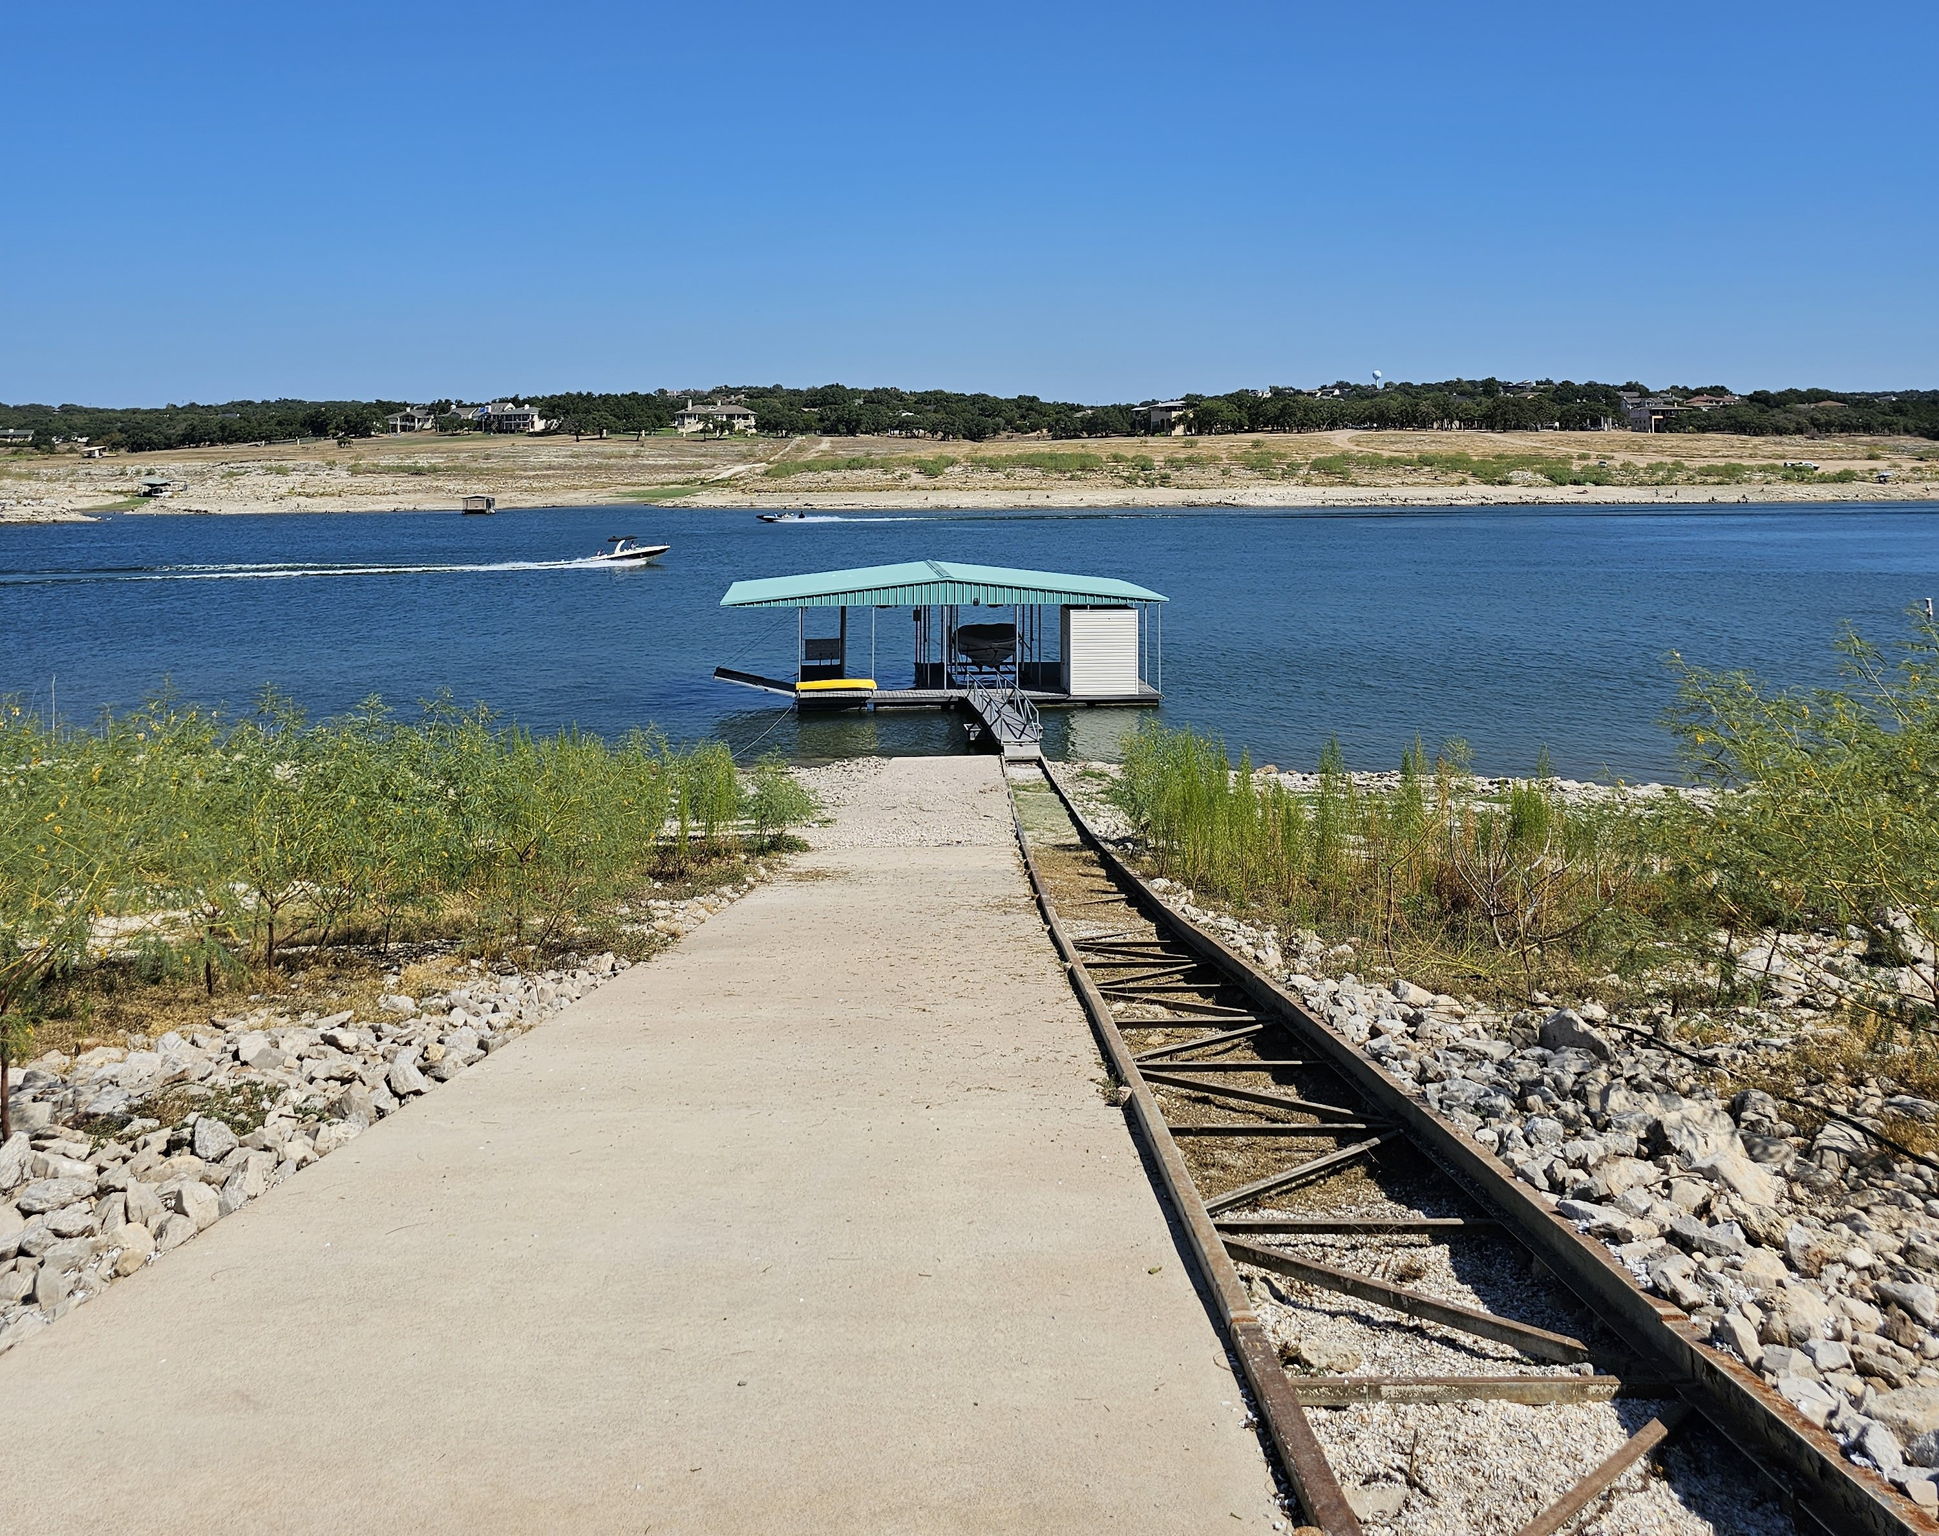 Your boat dock with the rail system on the right. You will not have to worry about the water levels.